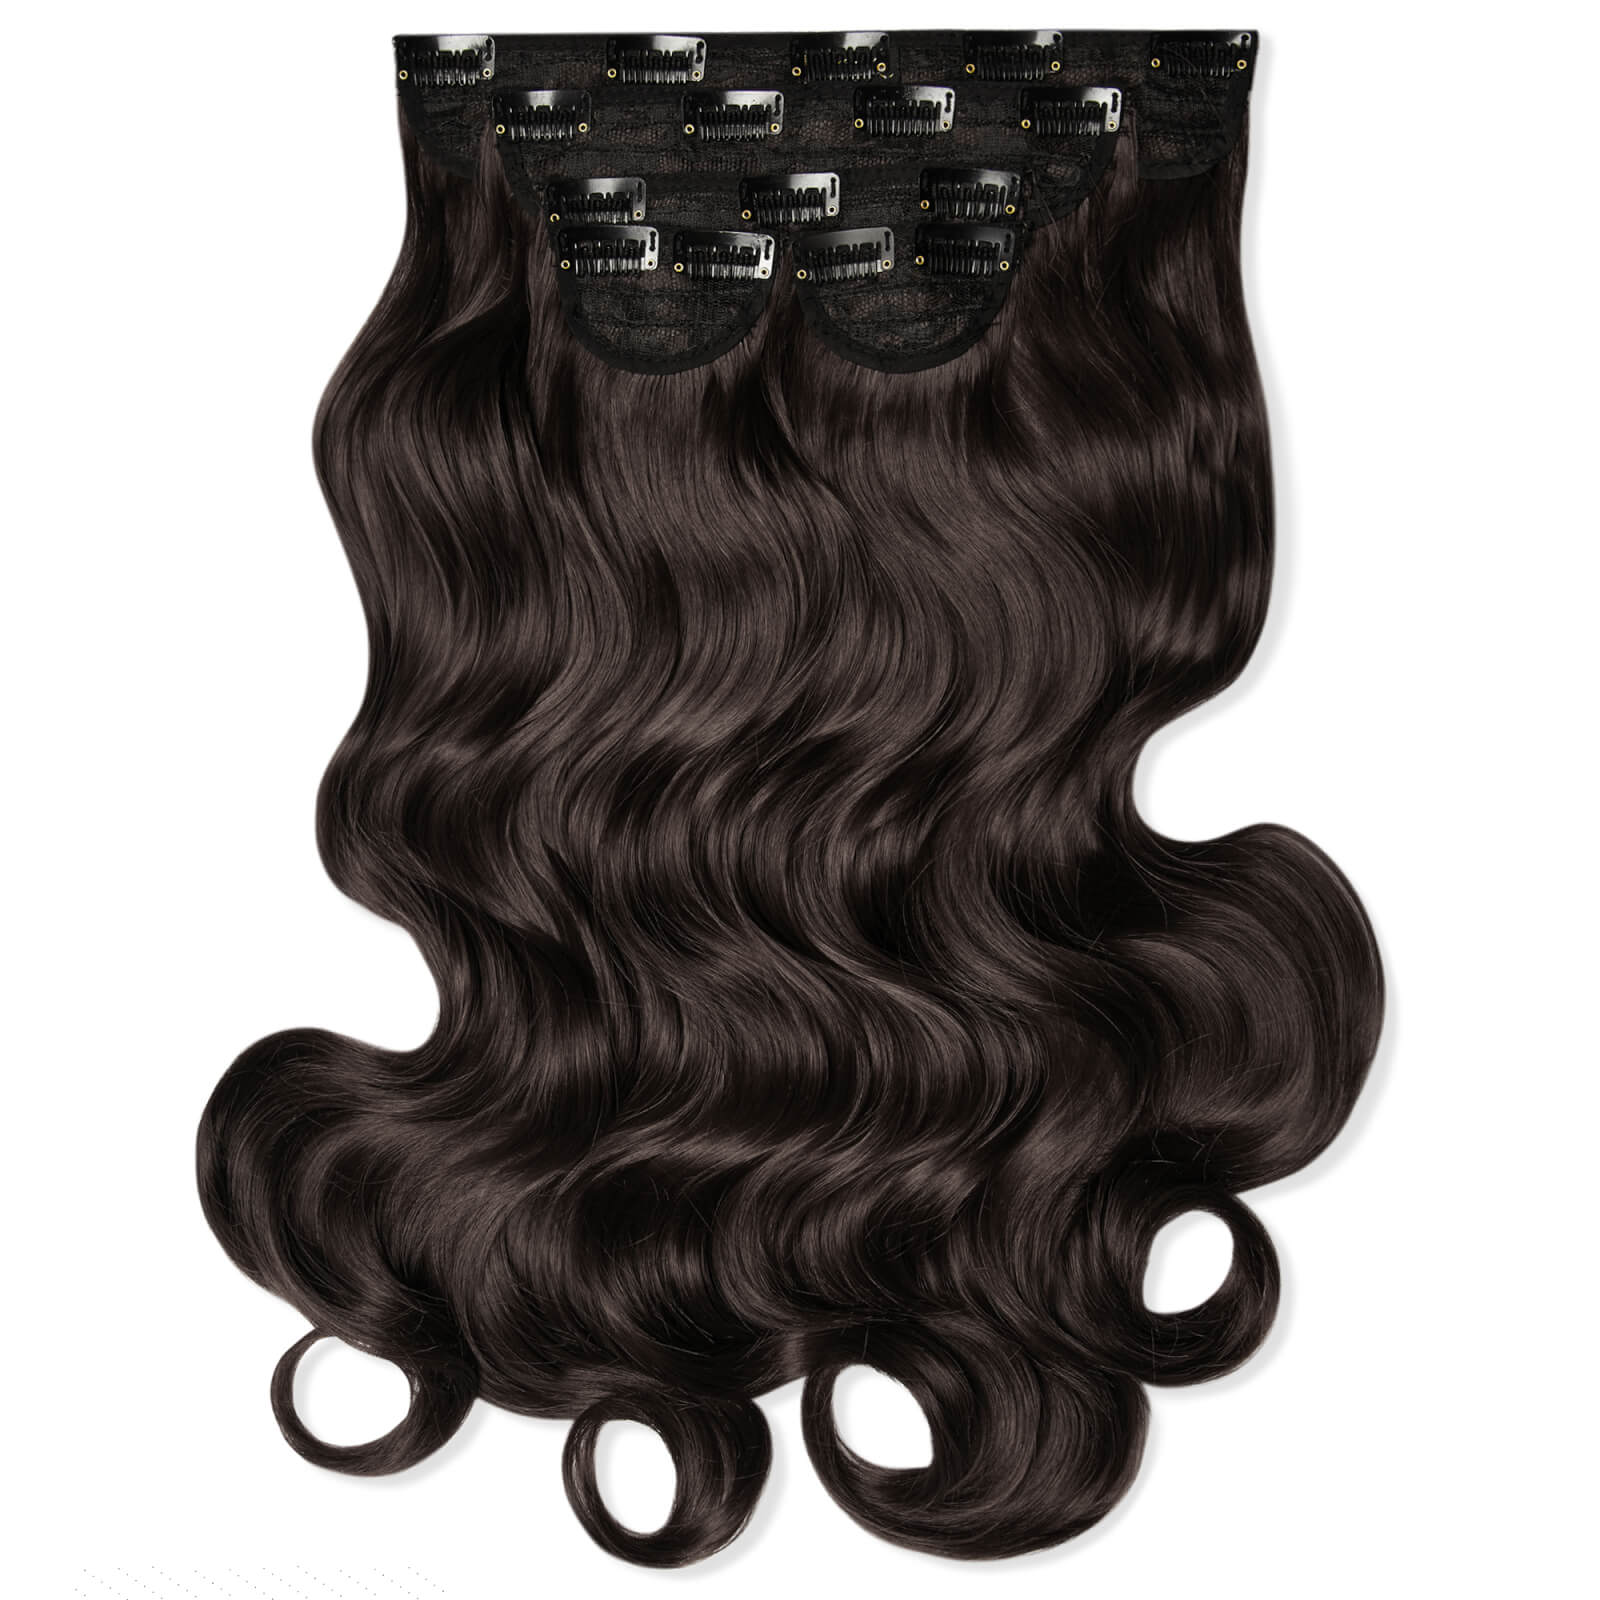 Lullabellz Super Thick 22  5 Piece Curly Clip In Extensions (various Shades) - Dark Brown